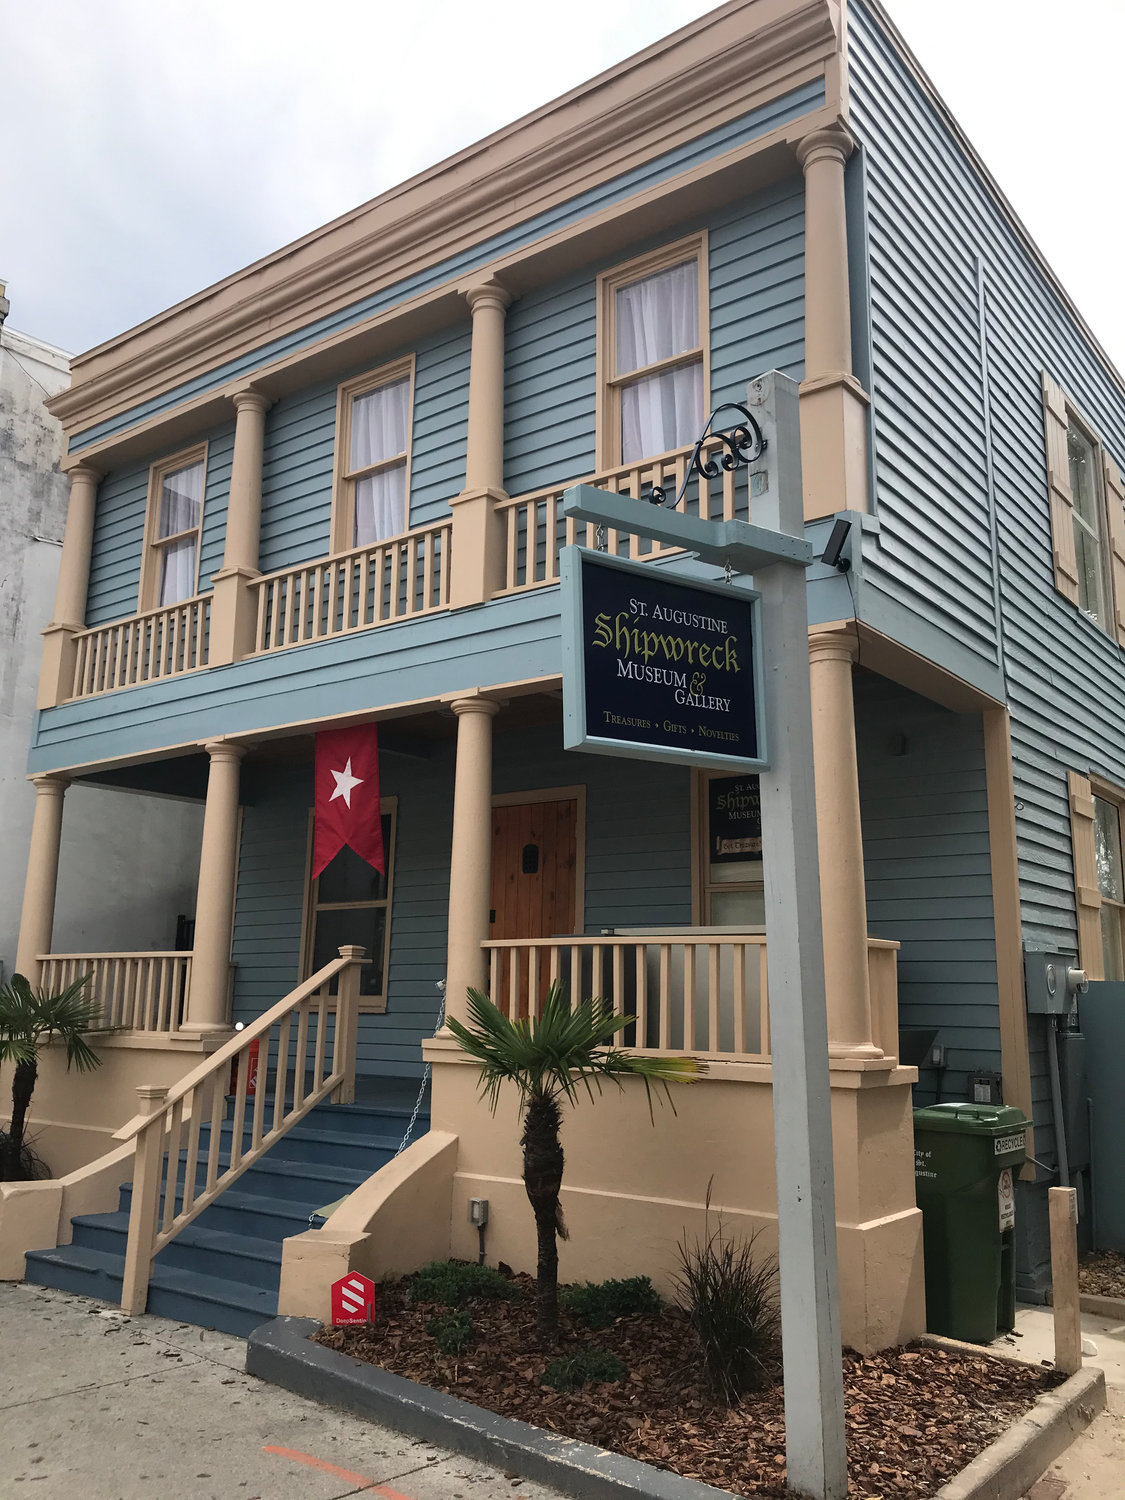 The St. Augustine Shipwreck Museum & Gallery is located at 46 Charlotte St. in St. Augustine.